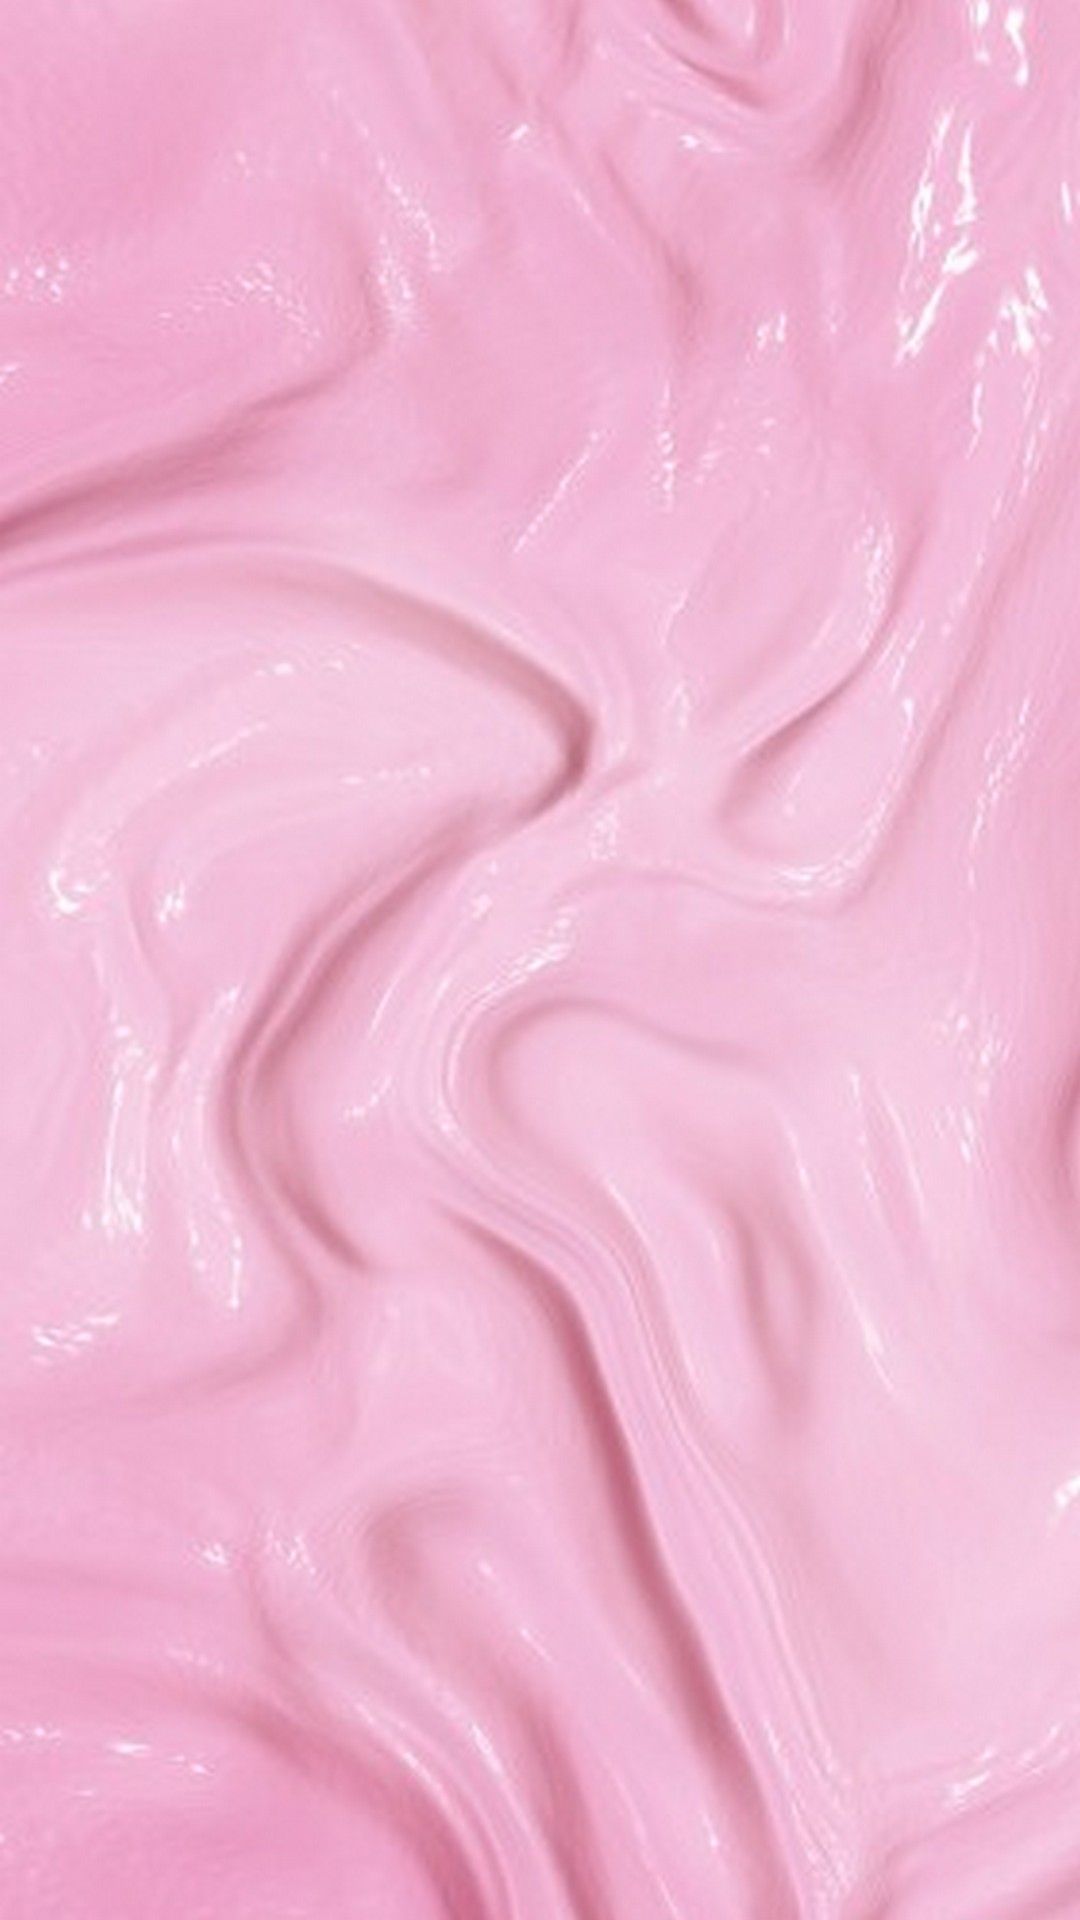 Pink Liquid Iphone Background - Iphone X Background Pink , HD Wallpaper & Backgrounds